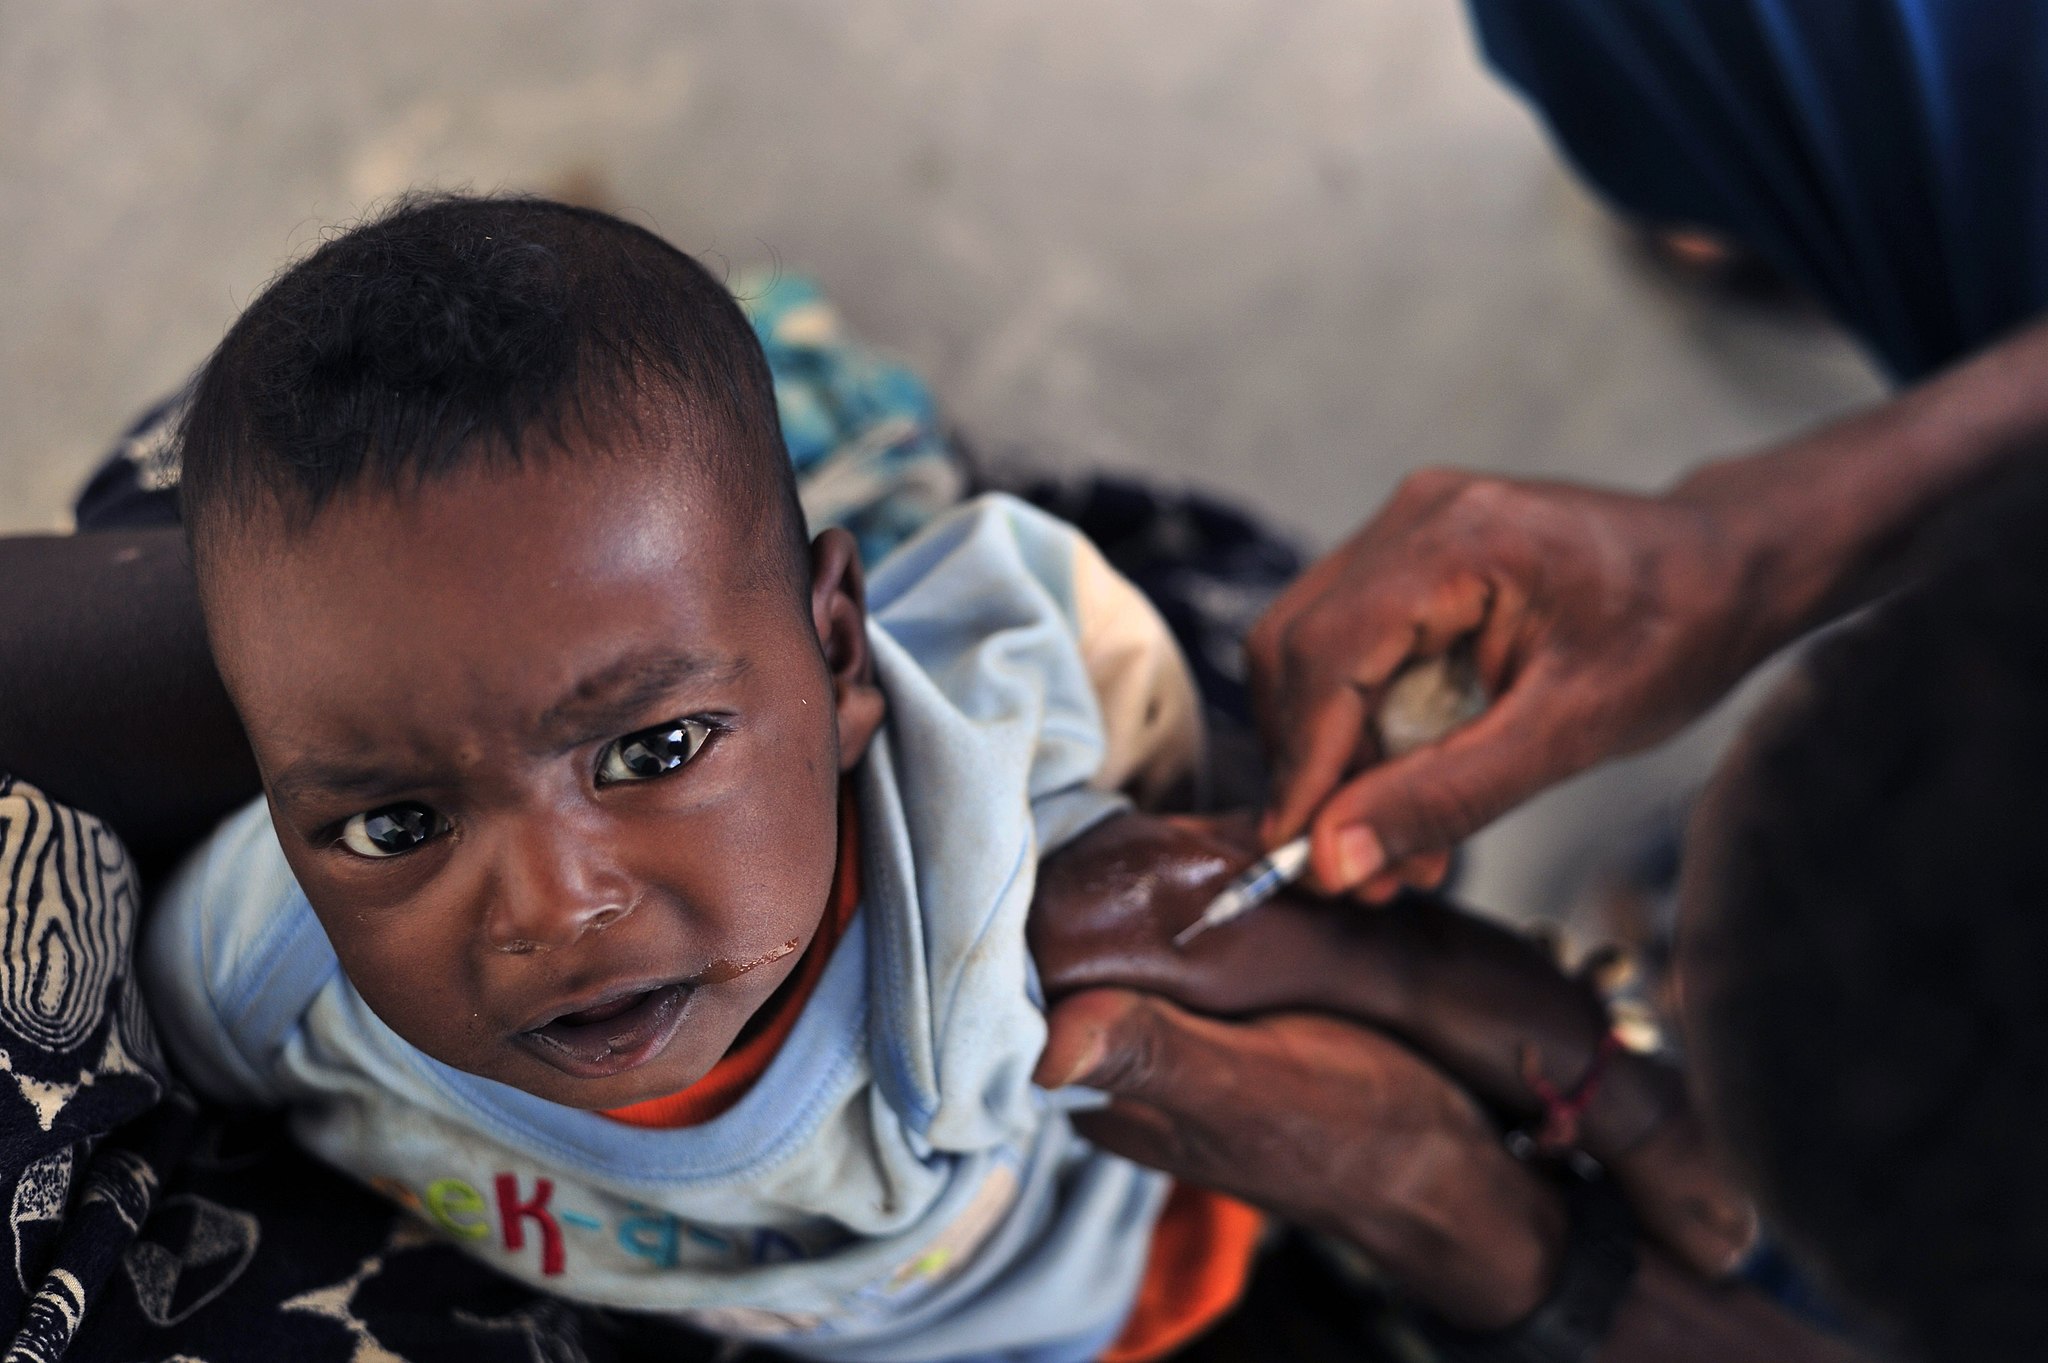 A child crying while receiving a vaccine shot in their arm